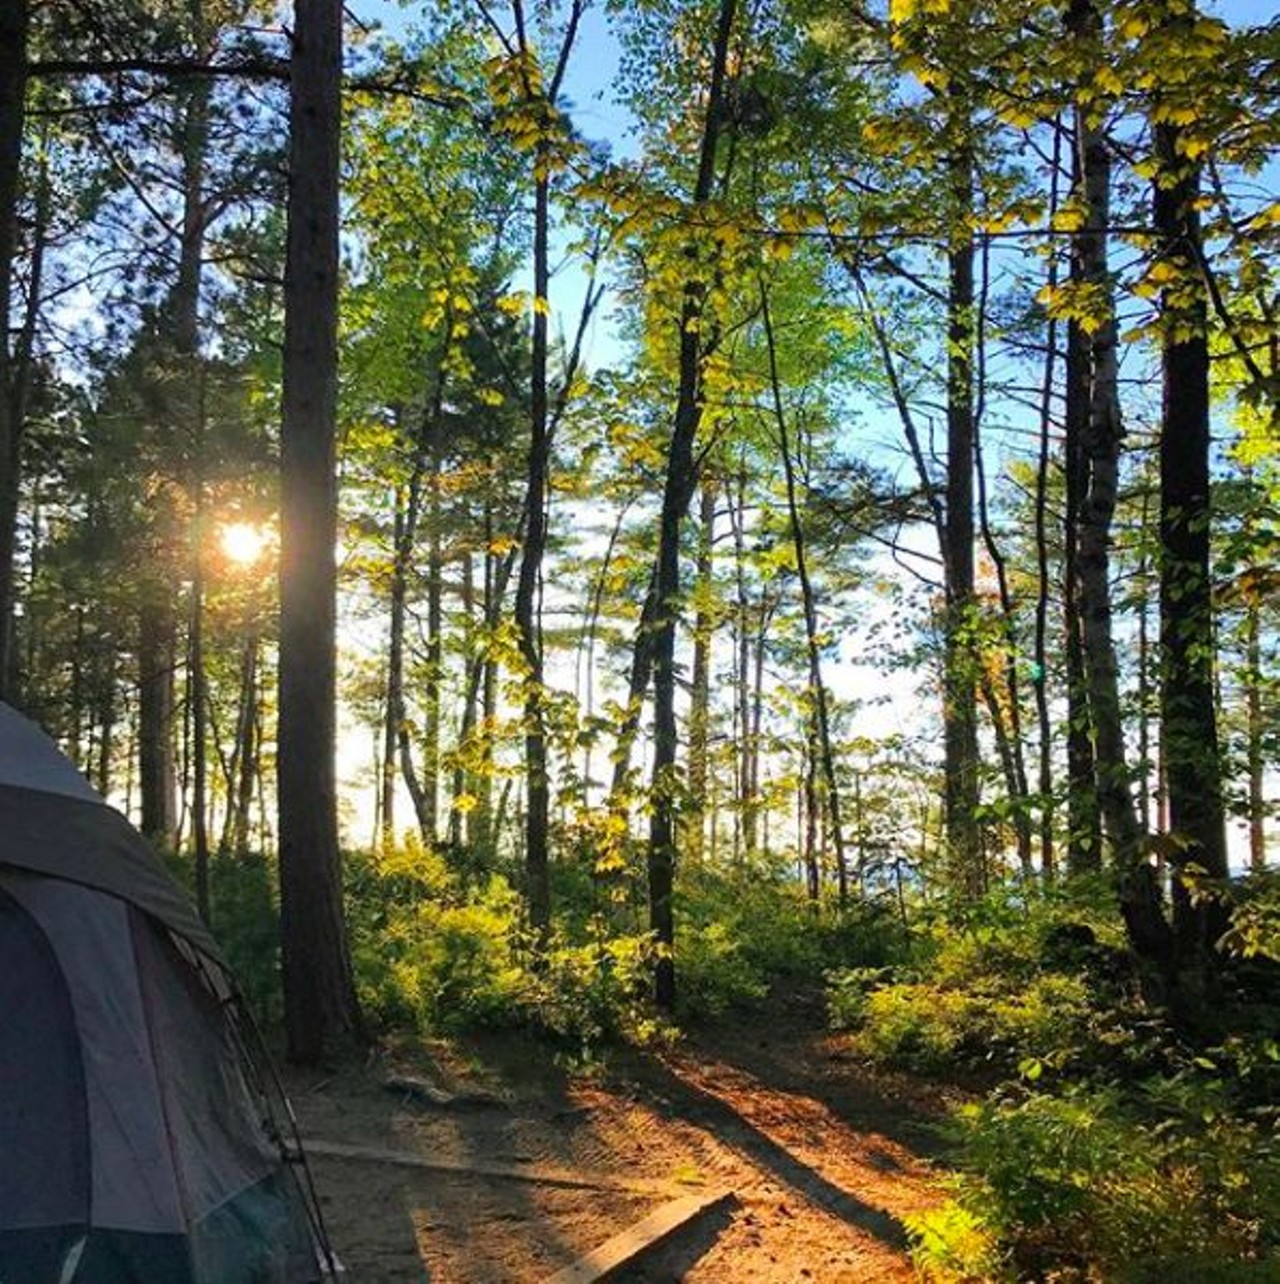 12 Mile Beach Campground
Grand Marias, MI
It is a bit of a drive to get to this campground, but the views are worth it. Located on the Pictured Rocks National Lakeshore, it is nothing short of breathtaking. Set up your tent in between the tall trees of northern Michigan and steps away from the beach. 
Photo via IG user @katlynmagee